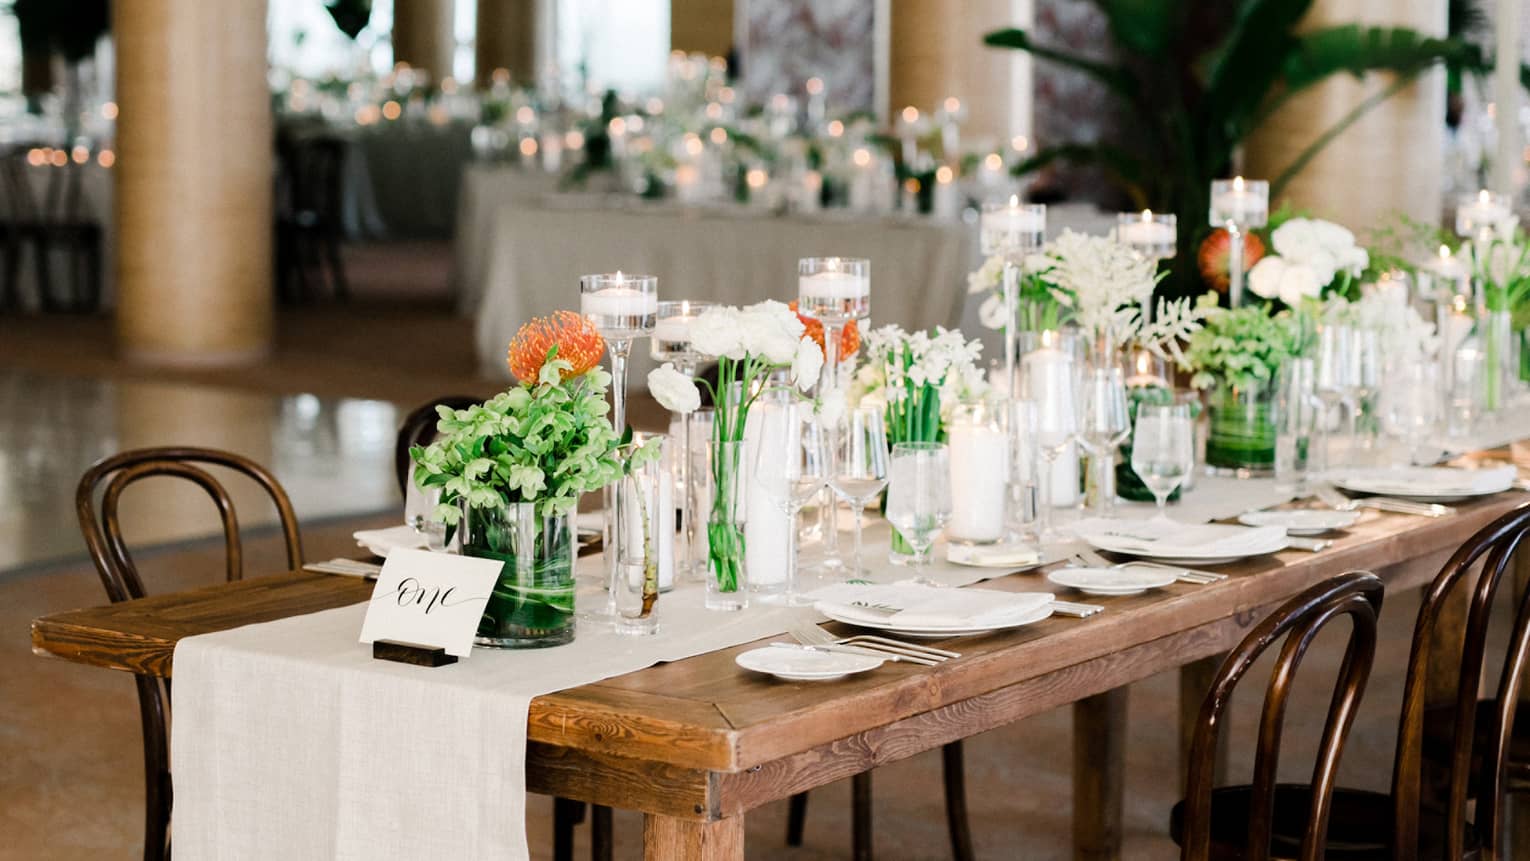 Event room with rustic wood dining table. table runner and flowers in vases